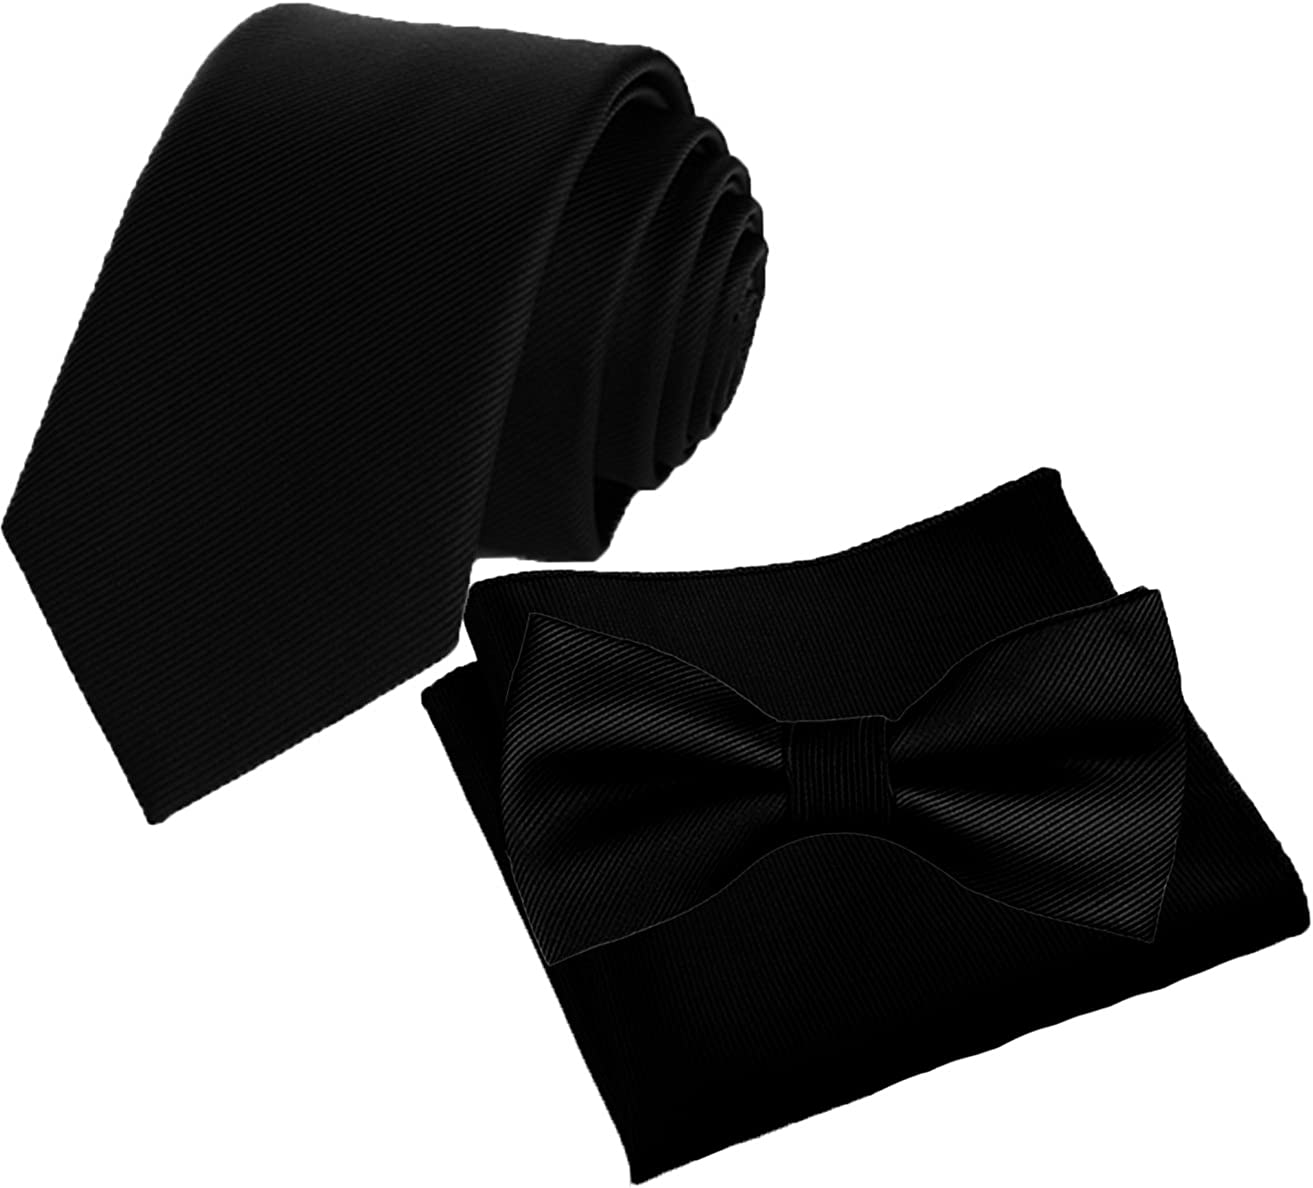 Bow Tie and Pocket Square Matching Set Flairs New York Gentlemans Essentials Neck Tie